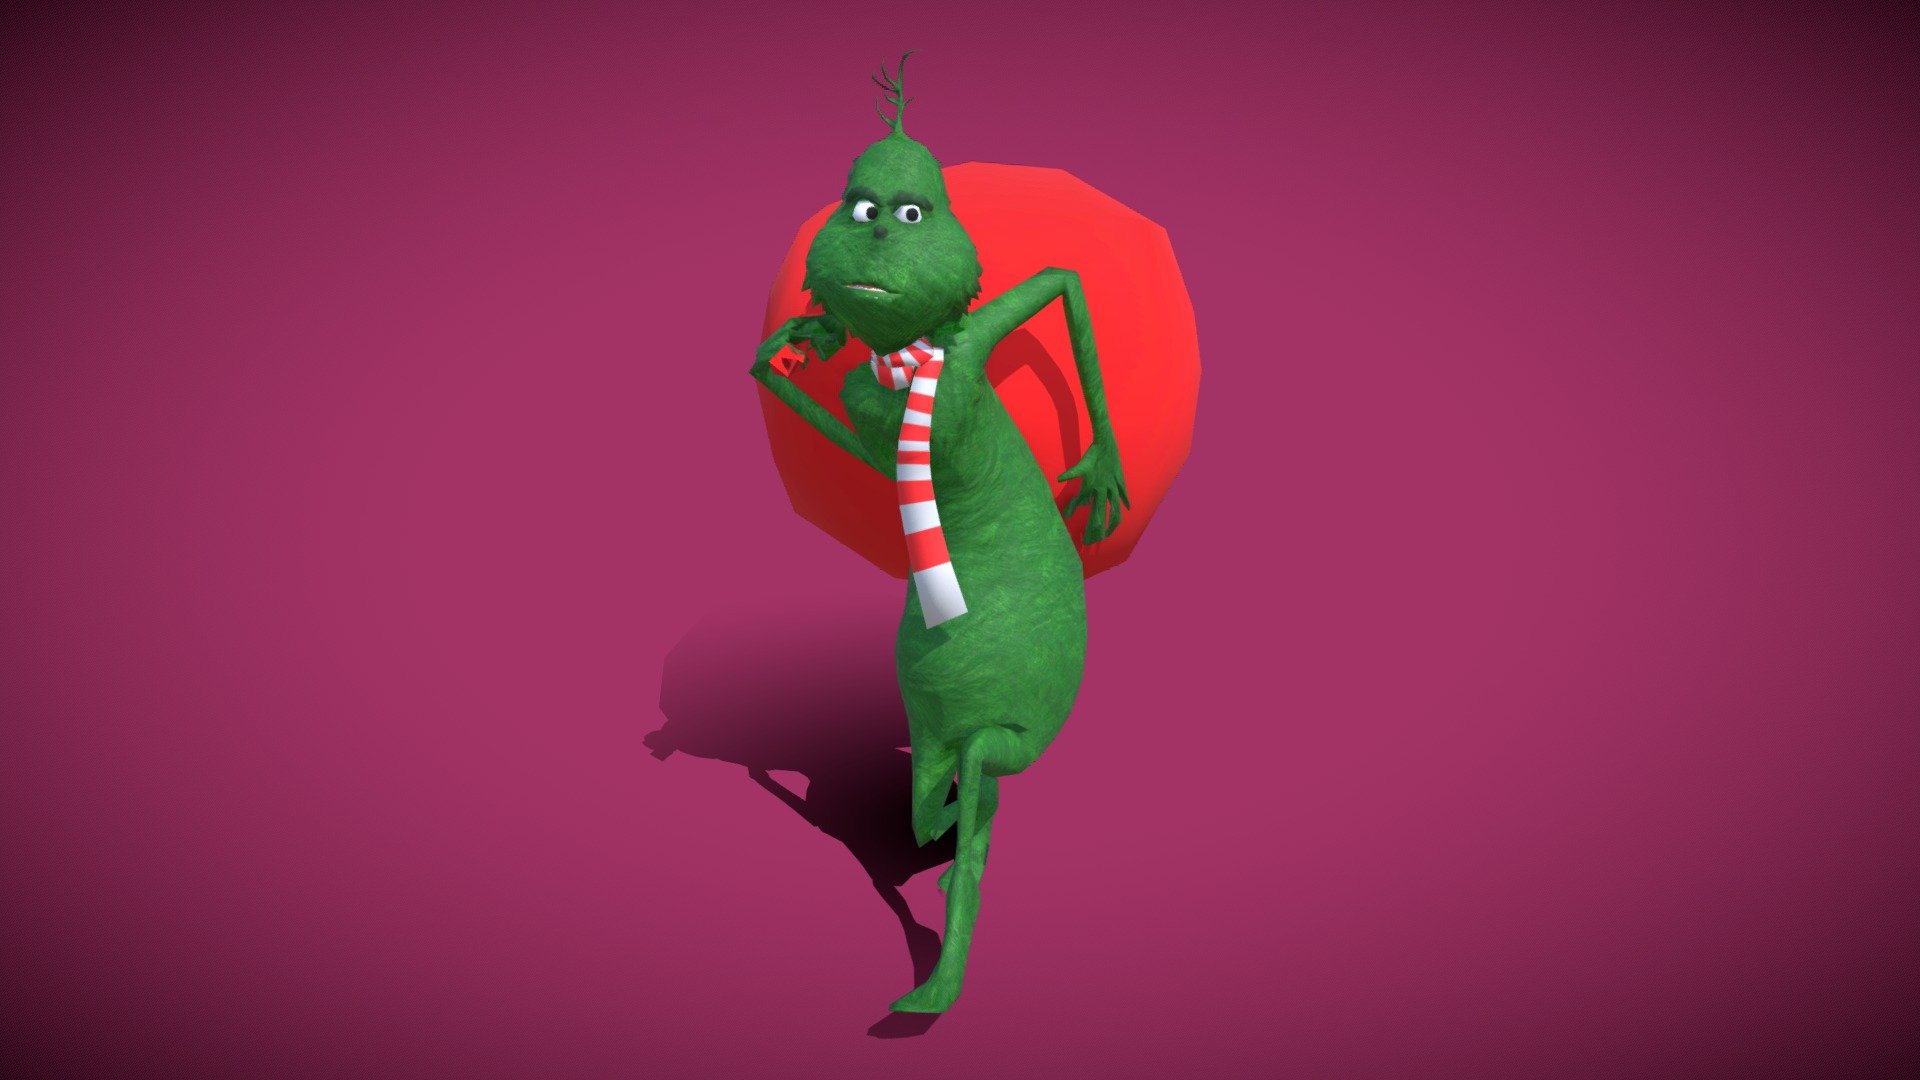 The grinch character modeling and rigin in blender 3D for animations

Low poly version modeling in blender 3D - The Grinch Low Poly - Buy Royalty Free 3D model by Mike3 117 (@Mike.Llanas) 3d model